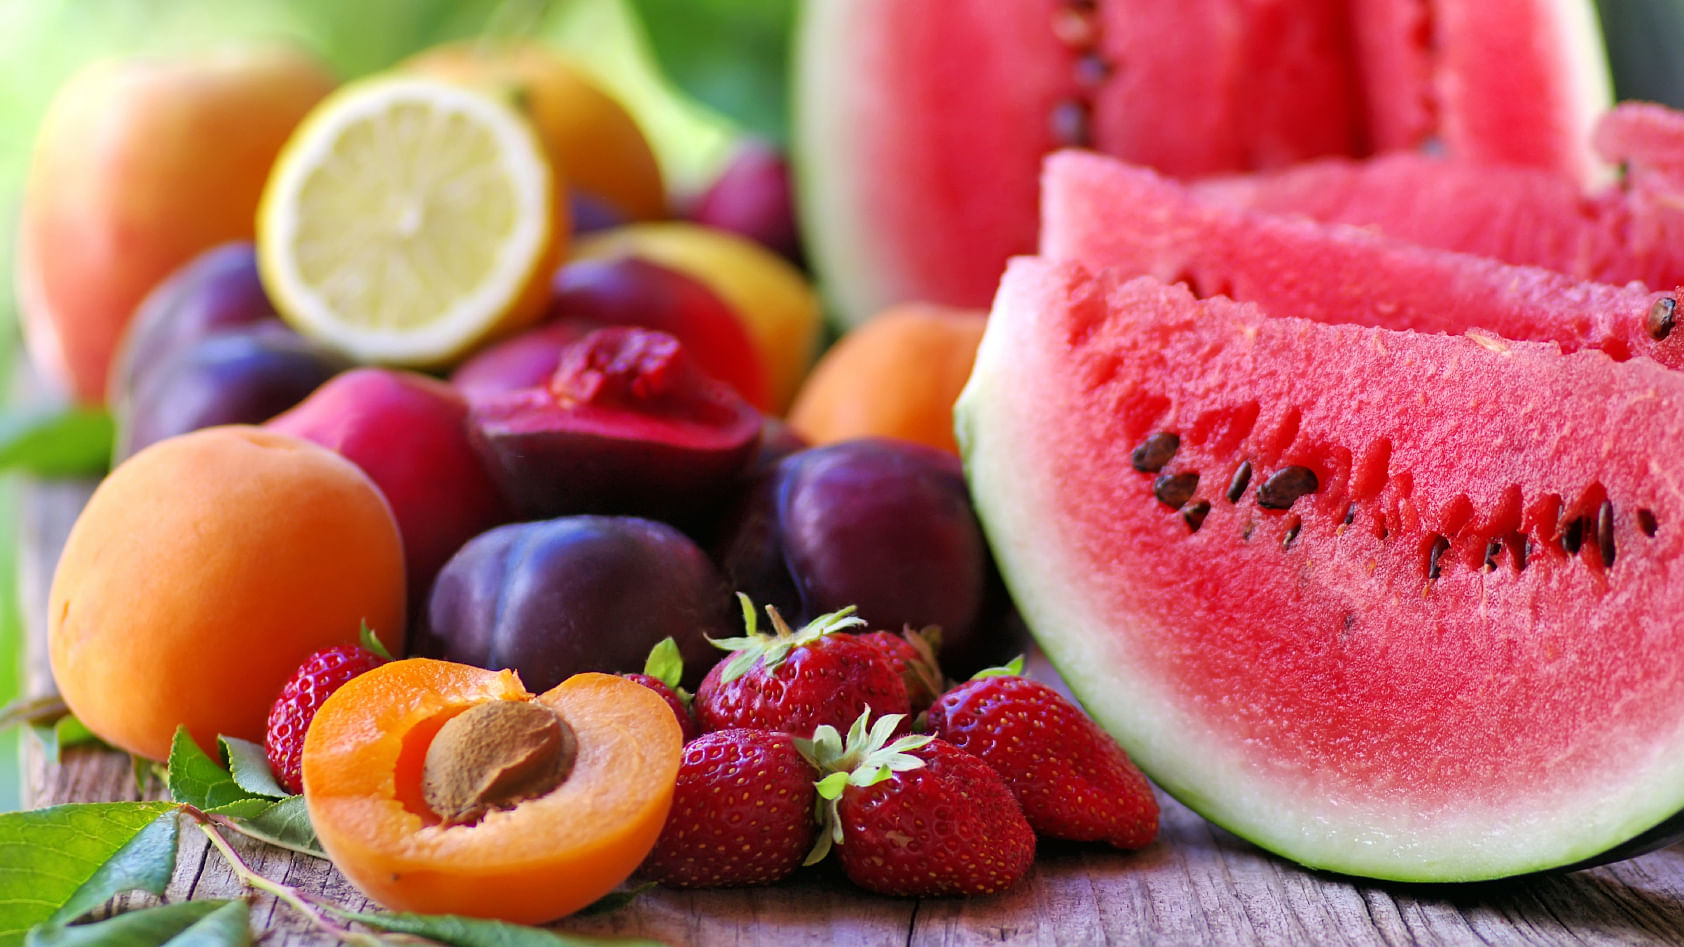 Are fruits a saviour or a skip in your quest to lose weight? (Photo: iStockphoto)